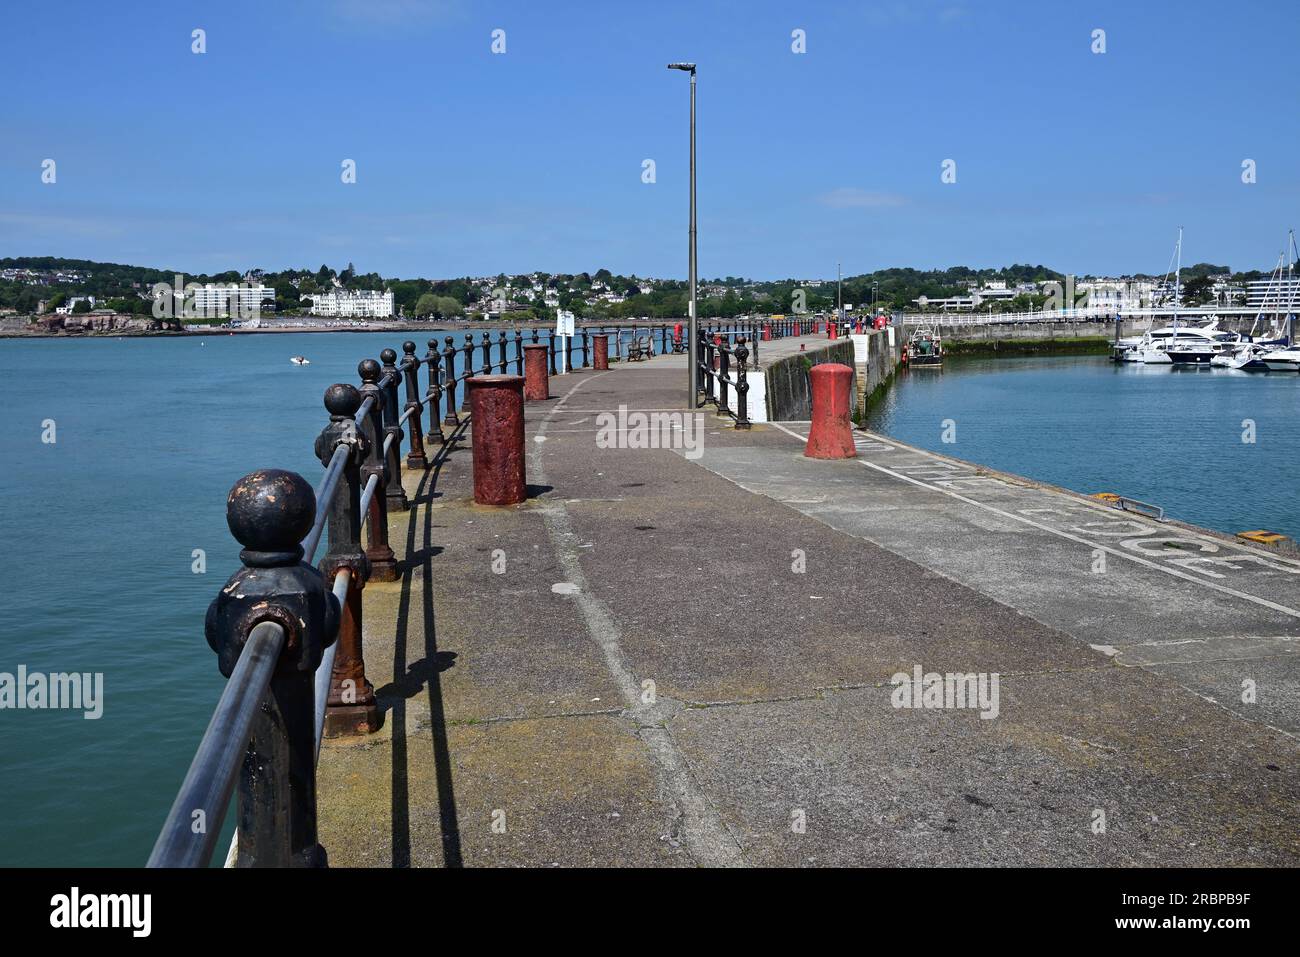 Haldon pier, which forms the outer wall of the harbour at Torquay, South Devon. Stock Photo